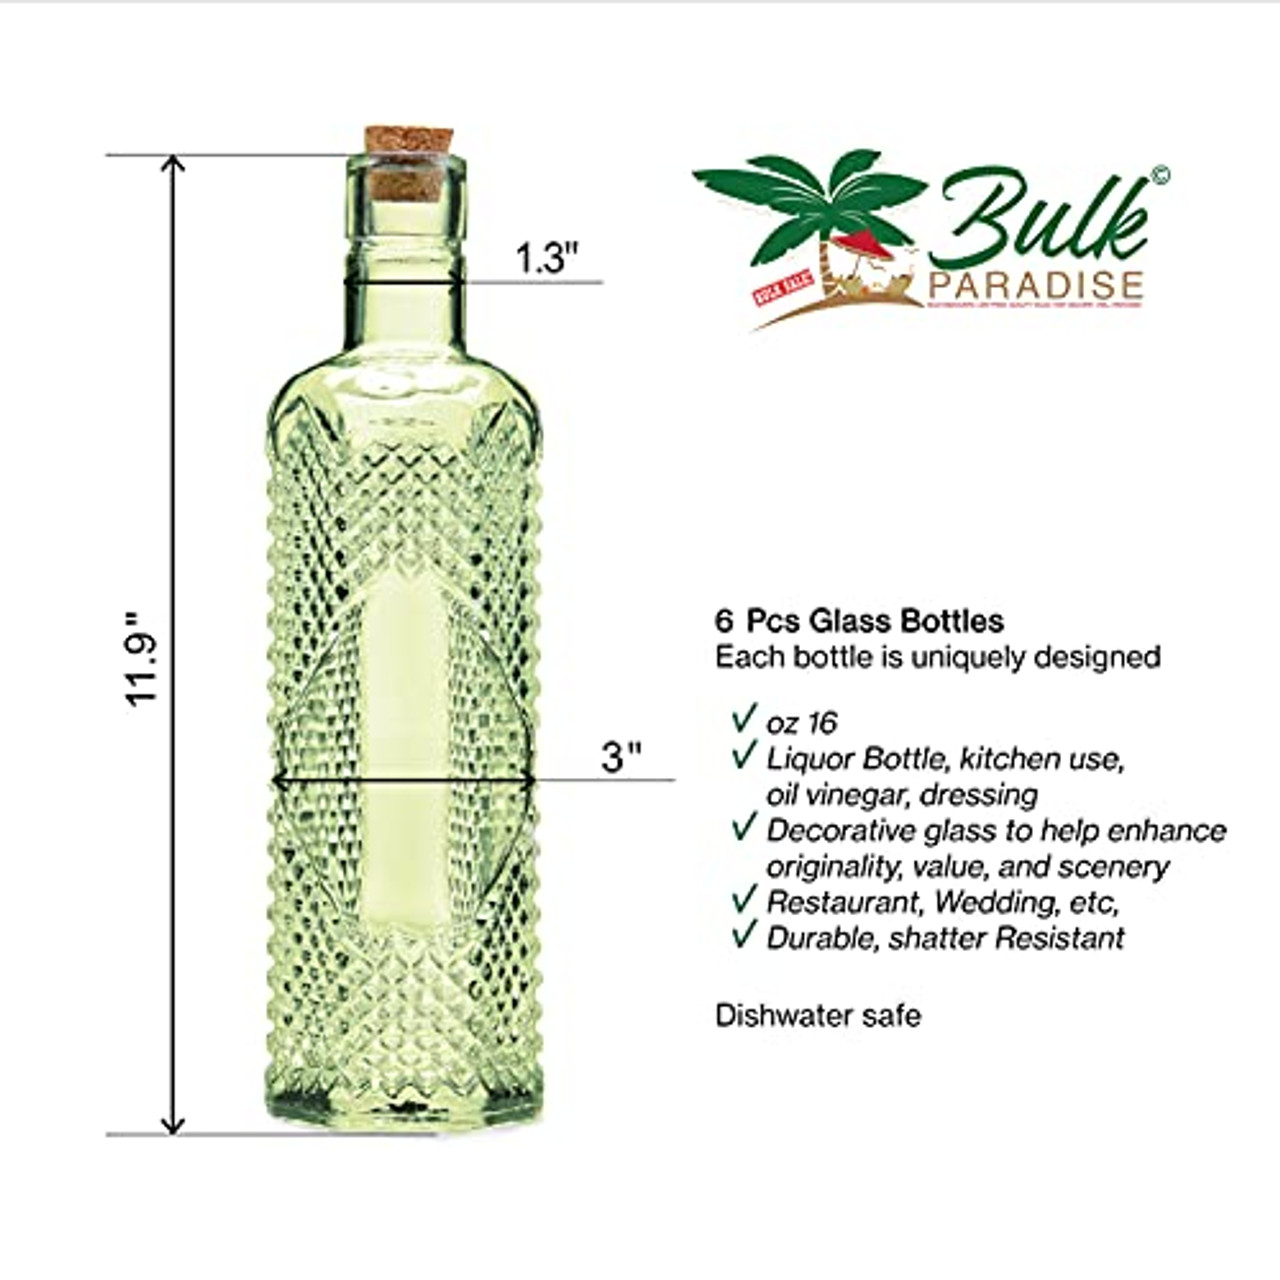 Bulk Paradise Small Green Vintage Glass Bottles with Corks, Bud Vases, Decorative, Potion, Assorted Design Set of 12 Pcs, 4.6 inch Tall (11.43cm), 1.4